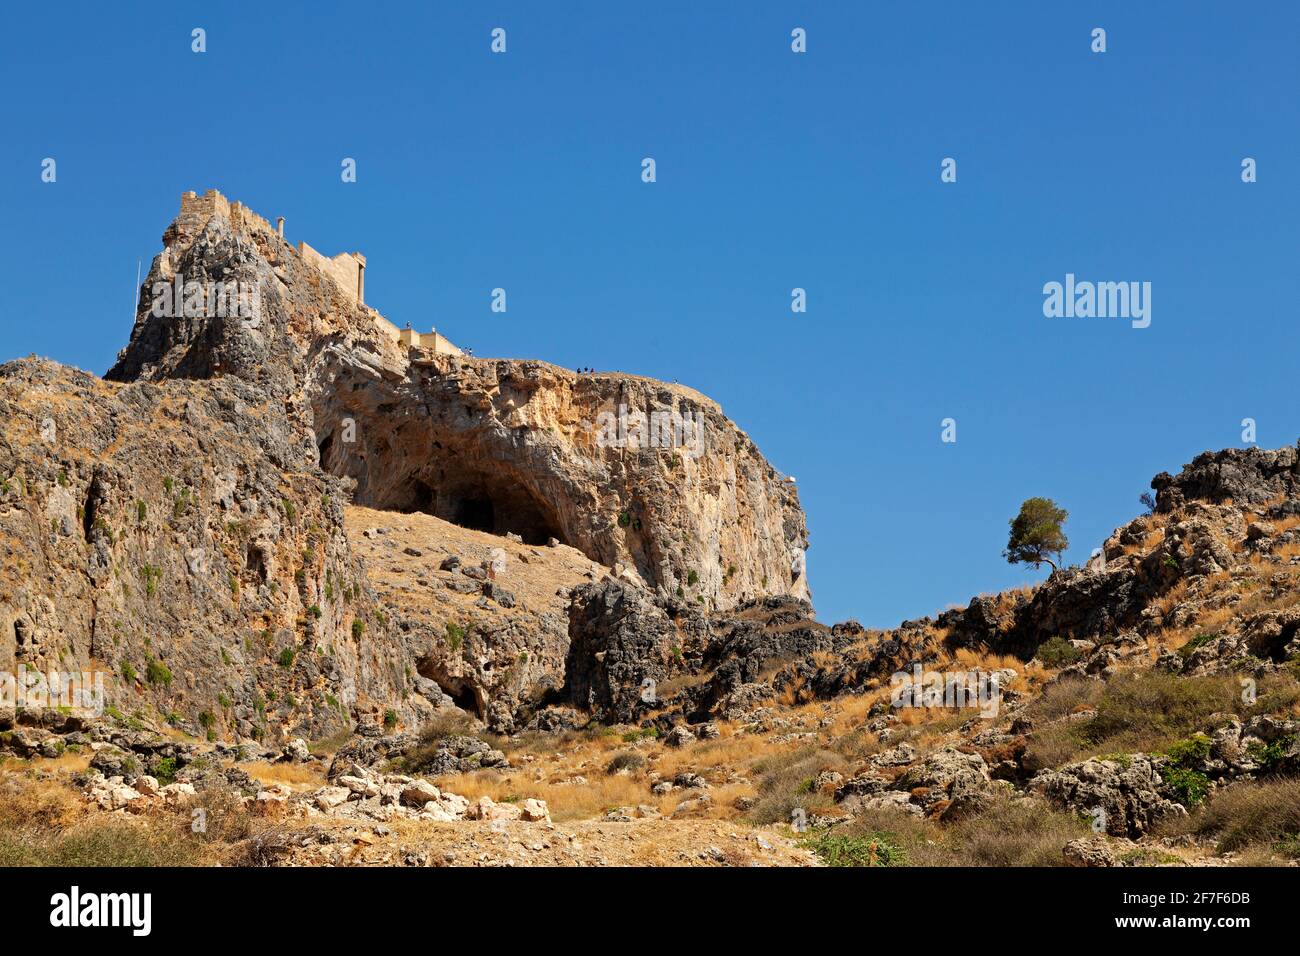 The Lindian Acropolis, an Ancient Greek citadel, on a rocky outcrop in Lindos on Rhodes, Greece. The citadel was later a base for the Knights of St Jo Stock Photo